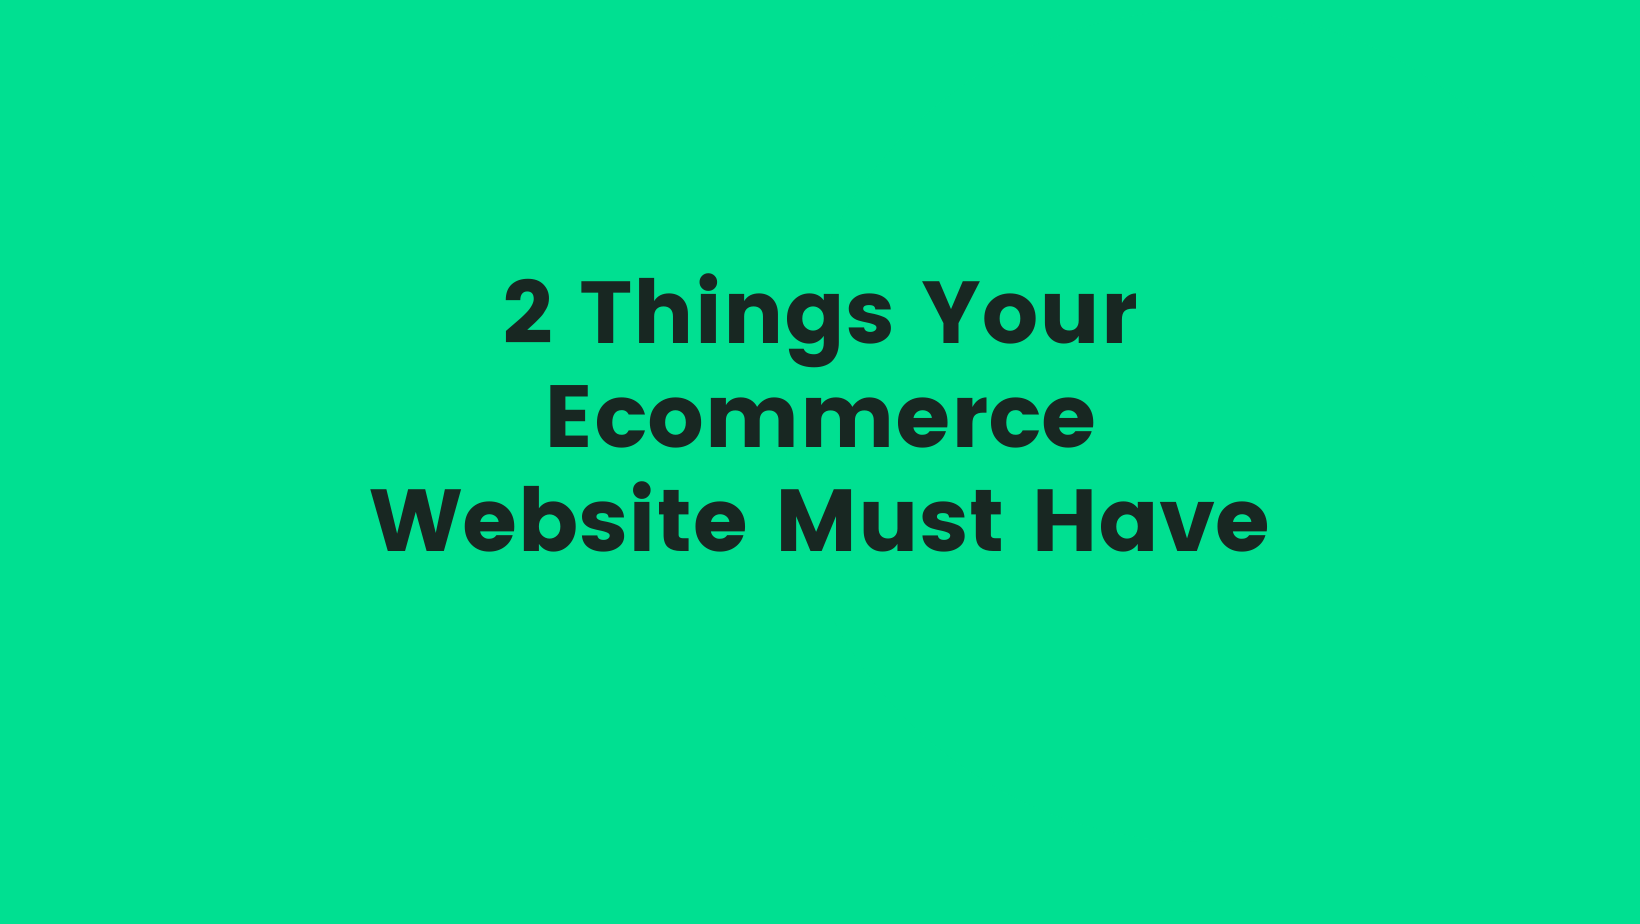 2 Things Your Ecommerce Website Must Have